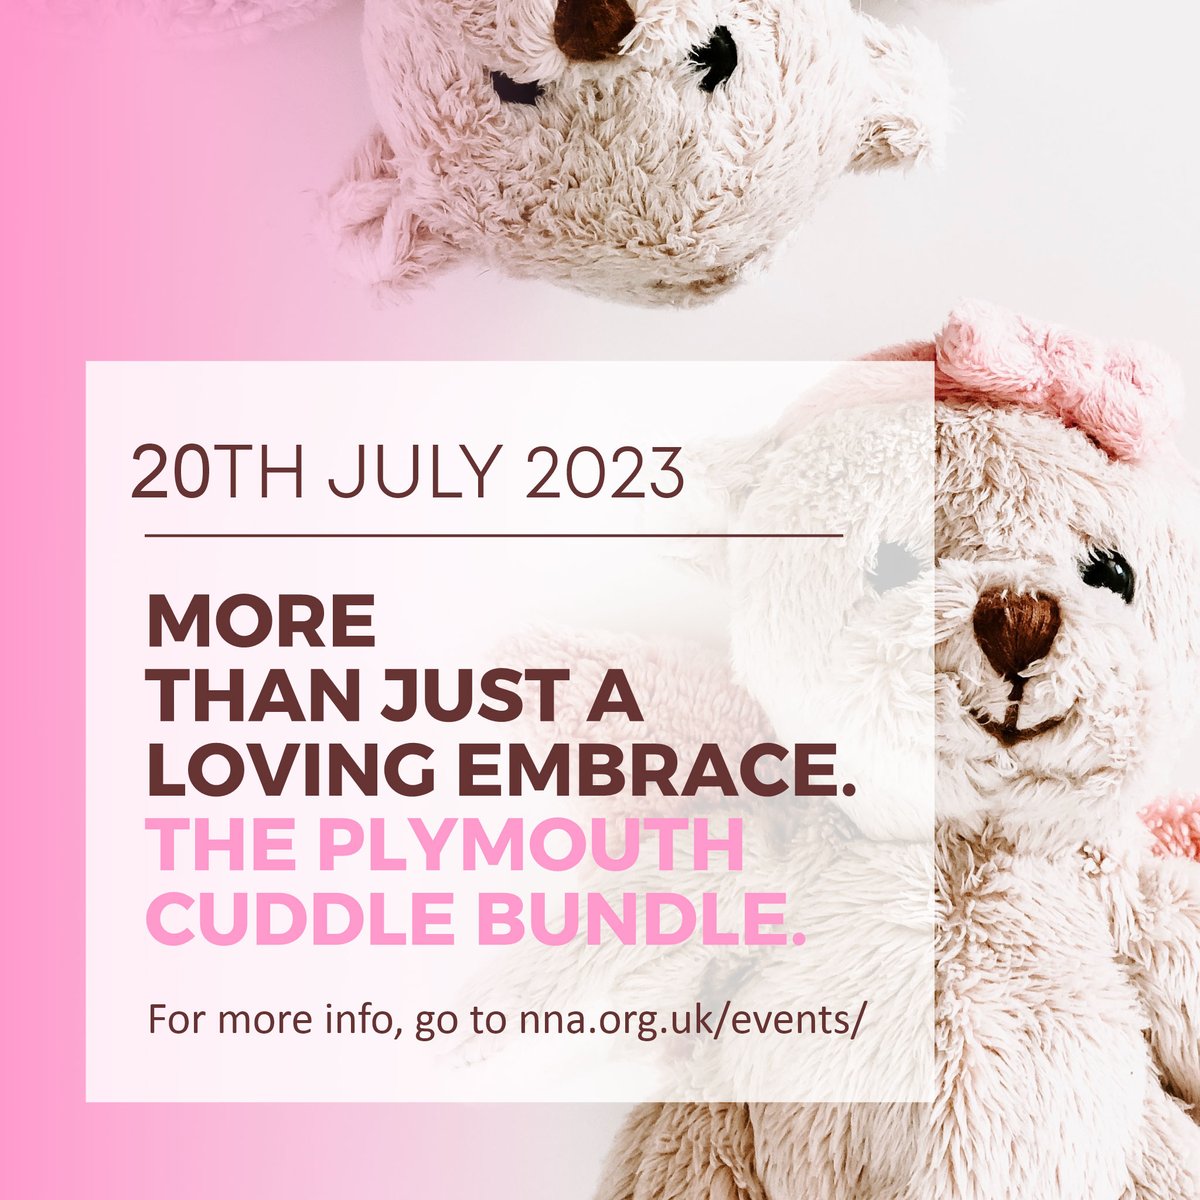 MORE THAN JUST A LOVING EMBRACE. THE CUDDLE BUNDLE - 20.07.23, 12pm-1.30pm. The Cuddle Bundle initiative supports parents to hold & cuddle their babies. Join this webinar & find out how to implement it, the challenges, solutions & benefits #FICare 👉 nna.org.uk/events